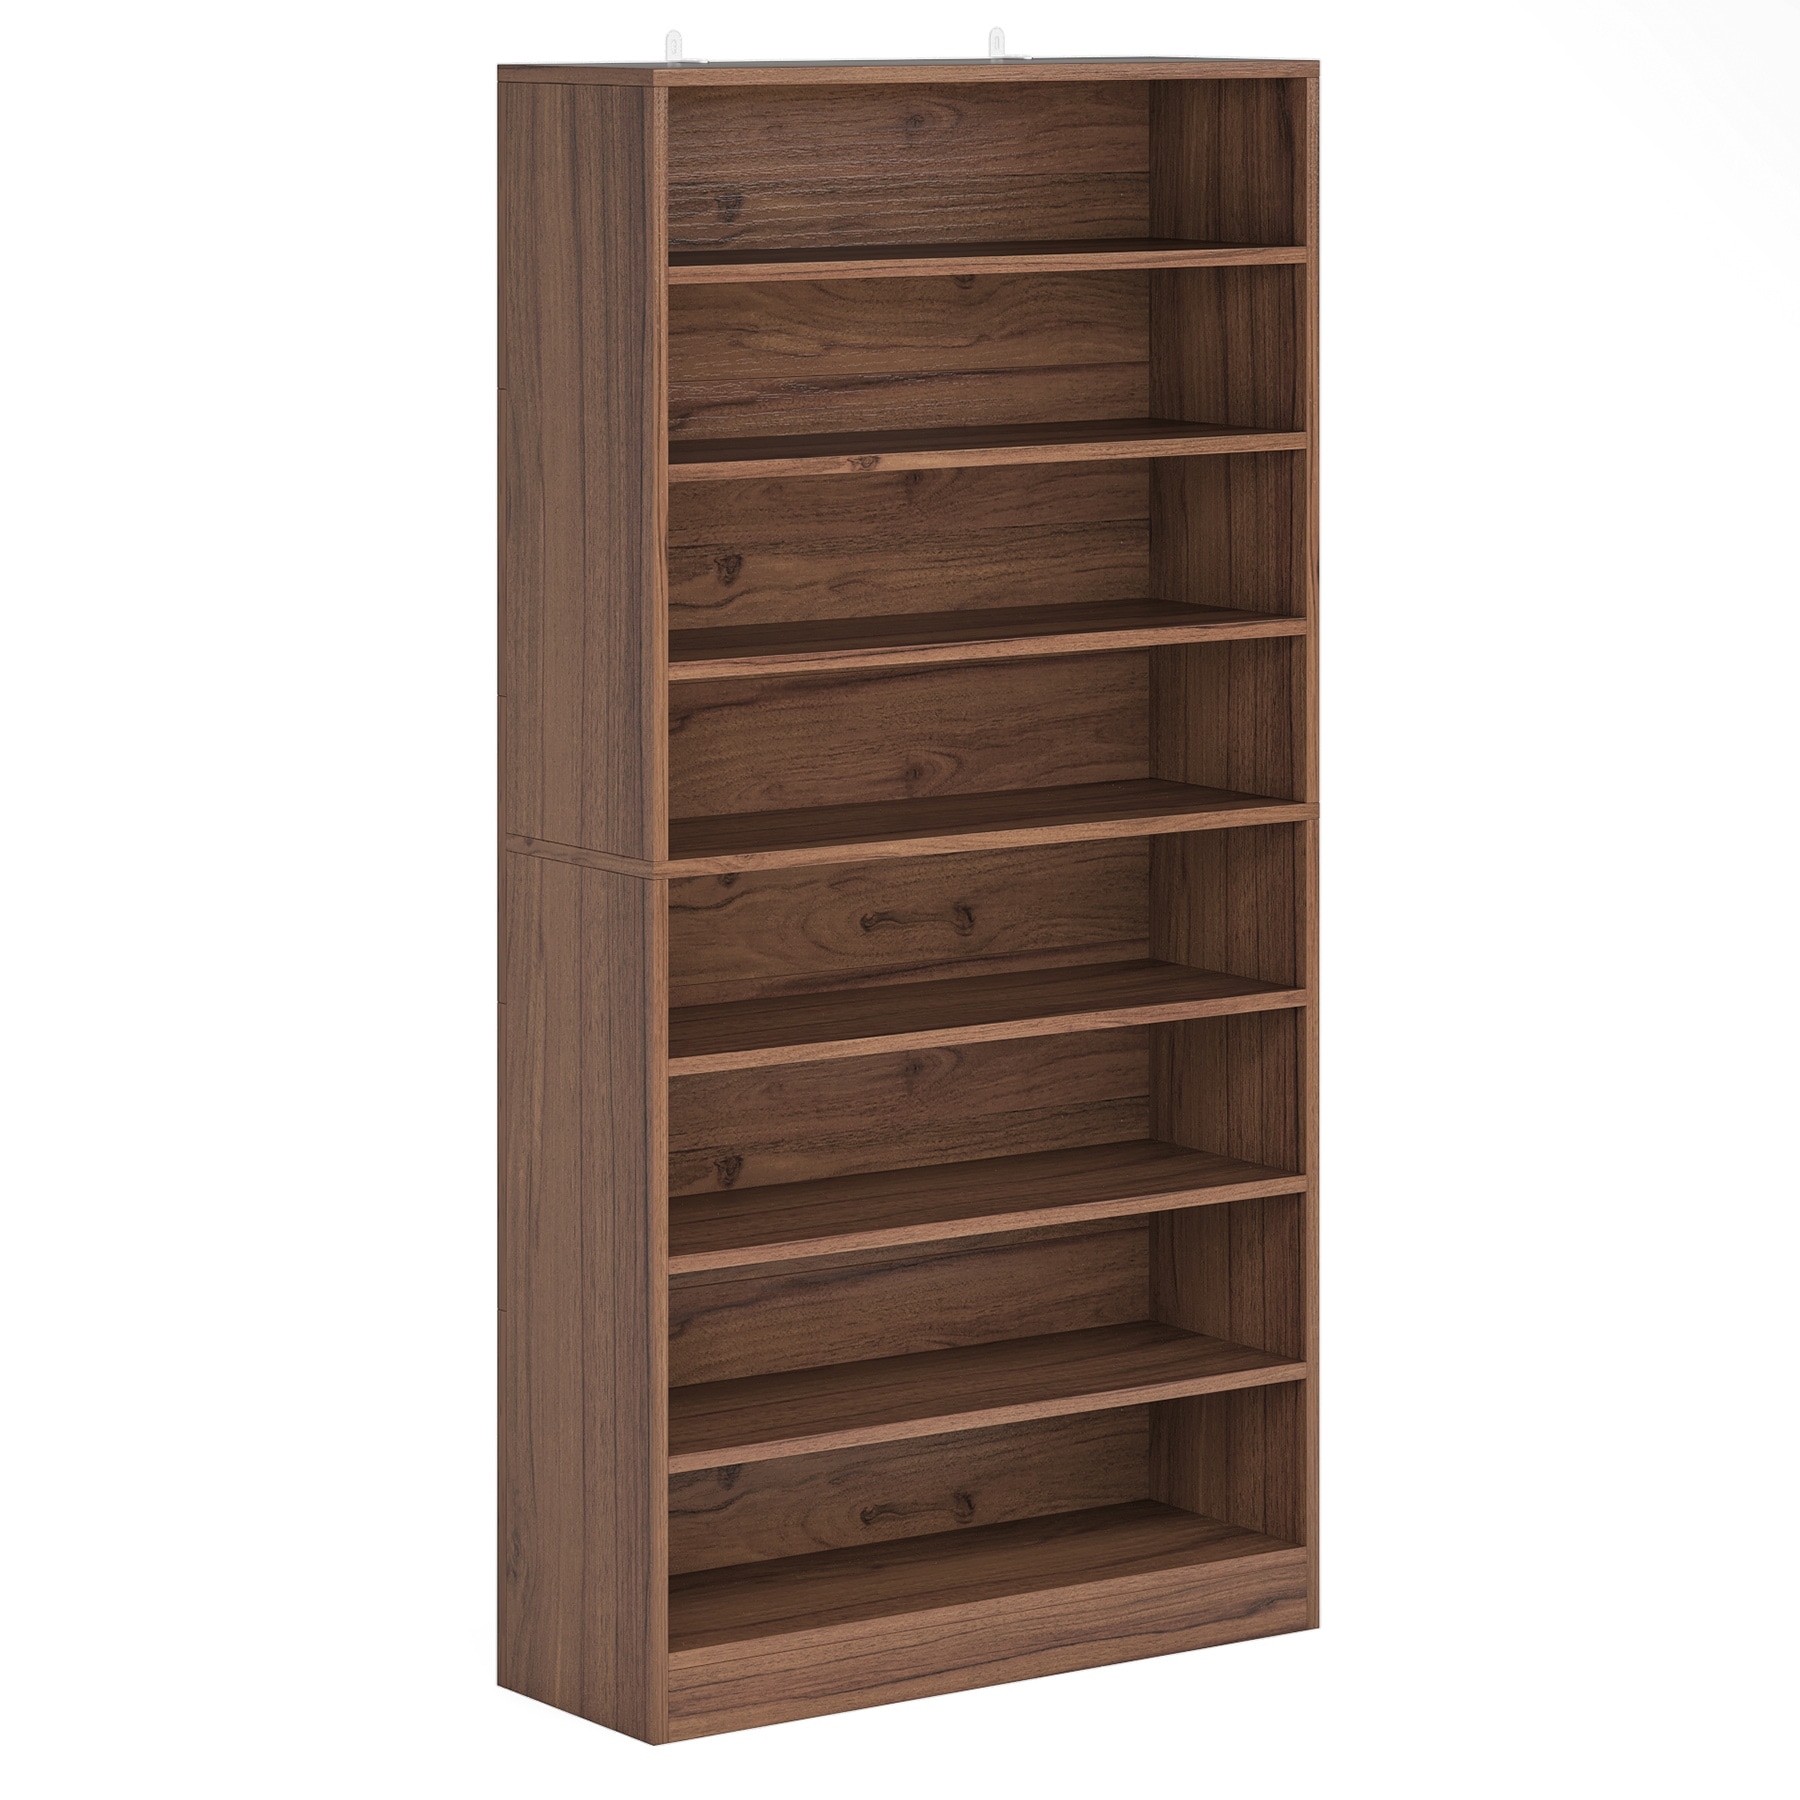 https://ak1.ostkcdn.com/images/products/is/images/direct/f2ad4d1cf609cf39eb09798b19f5c9b094ccd712/Shoe-Cabinet%2C9-Tiers-Tall-Shoes-Storage-Rack-Cabinets%2CWood-Shoe-Stand-with-Open-Shelf-for-Entryway.jpg